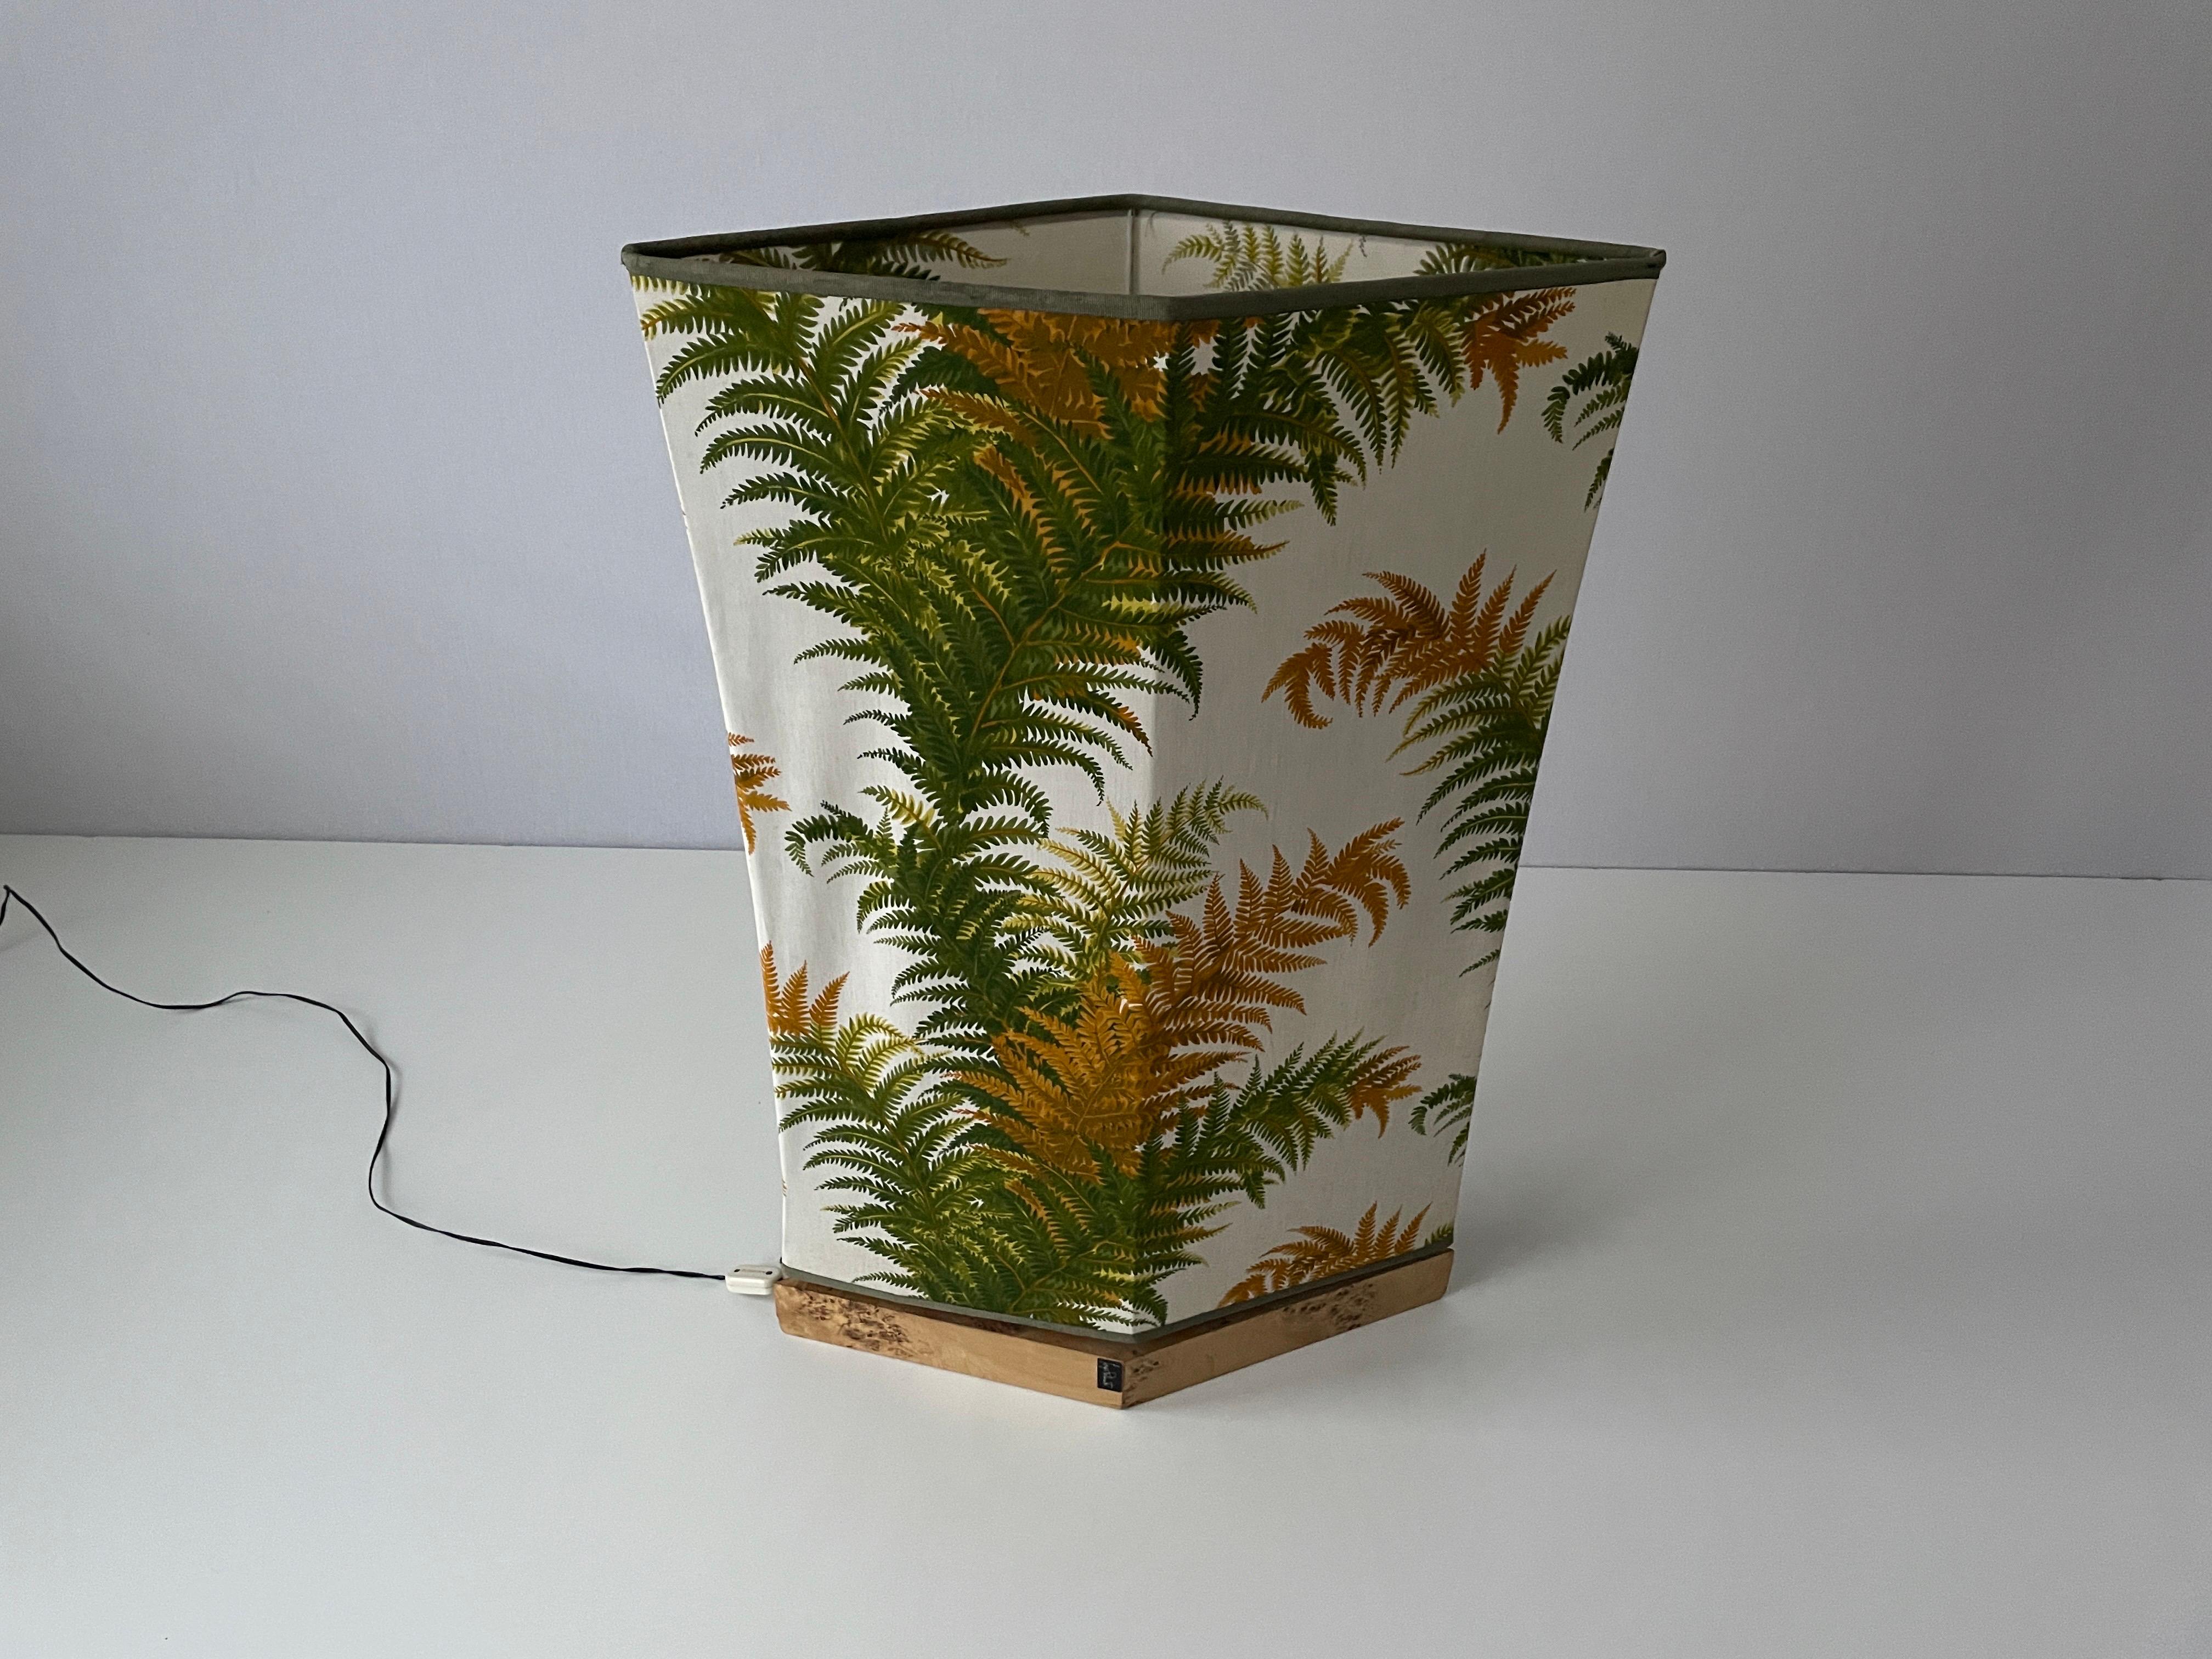 Forest Flower Theme Fabric Shade Floor Lamp with Signed Wood Base, 1950s, Italy

This lamp works with E27 light bulb. Max 100W
Wired and suitable to use with 220V and 110V for all countries.

Measurements:
Height: 94 cm
Width: 57 cm
Depth: 18 cm




